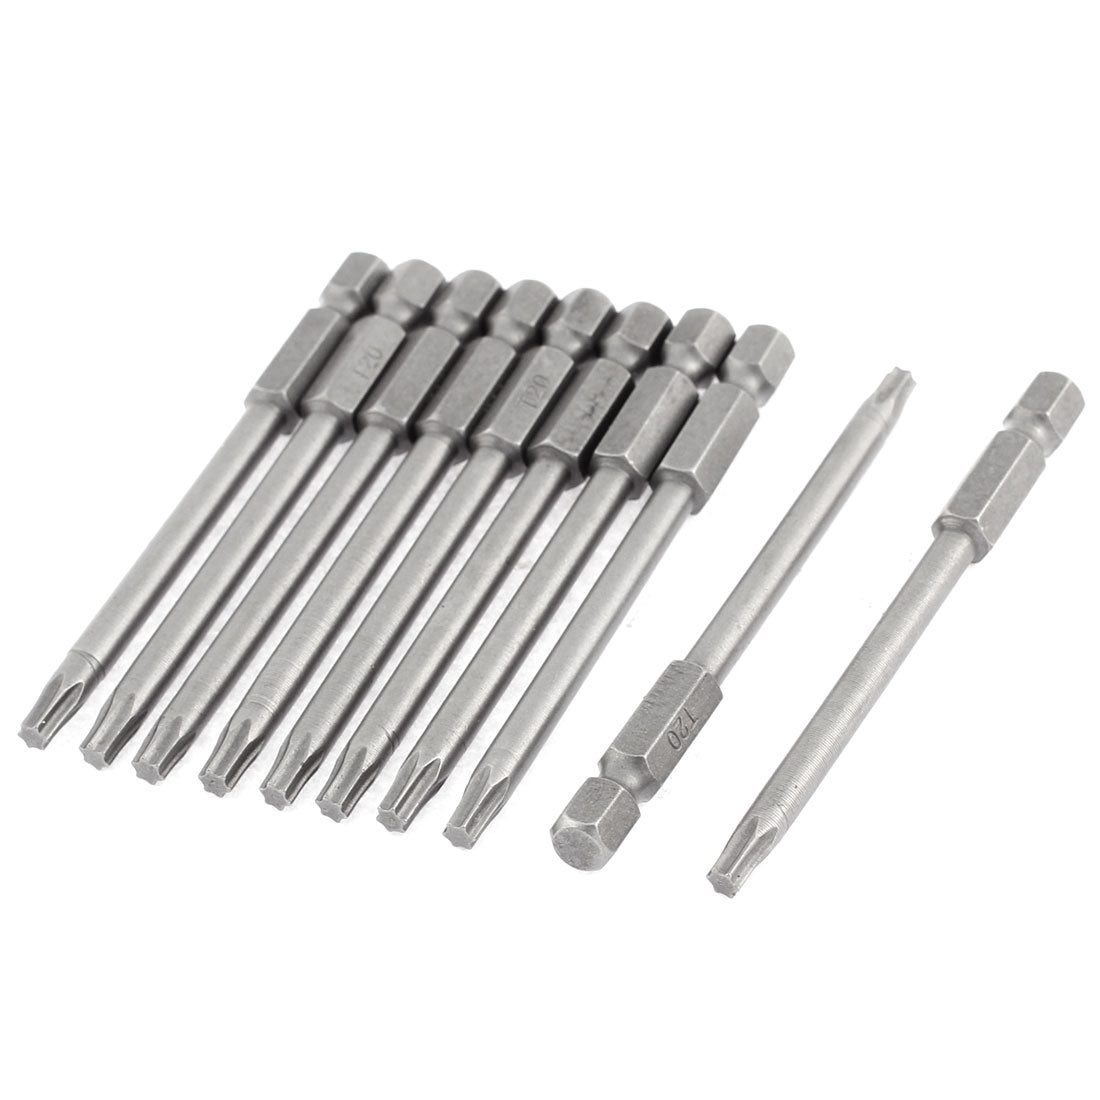 uxcell Uxcell 75mm Length T20 Magnetic Torx Tip Round Shank Screwdriver Bits 10 Pcs